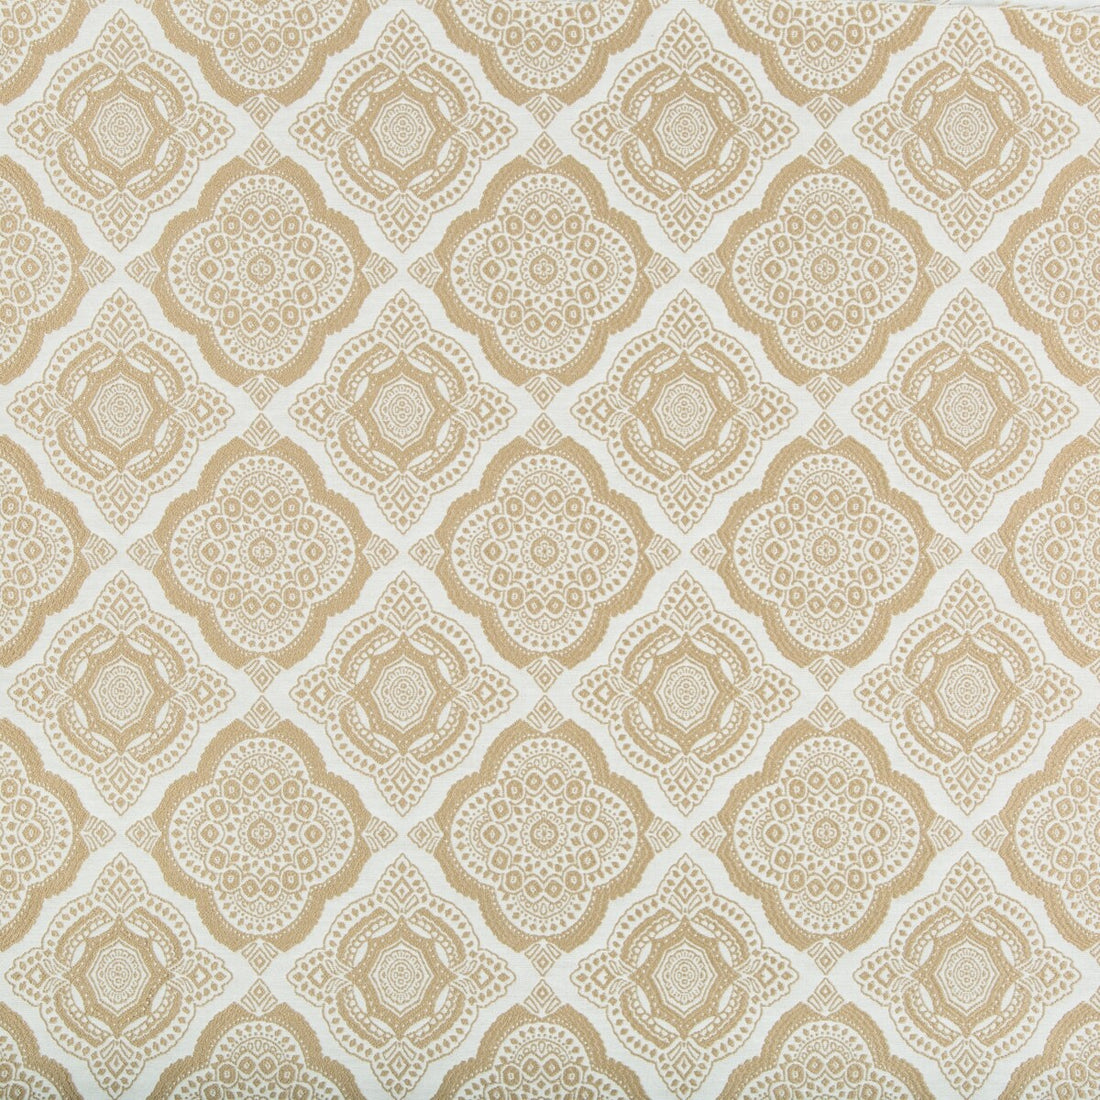 Kravet Contract fabric in 34742-116 color - pattern 34742.116.0 - by Kravet Contract in the Incase Crypton Gis collection